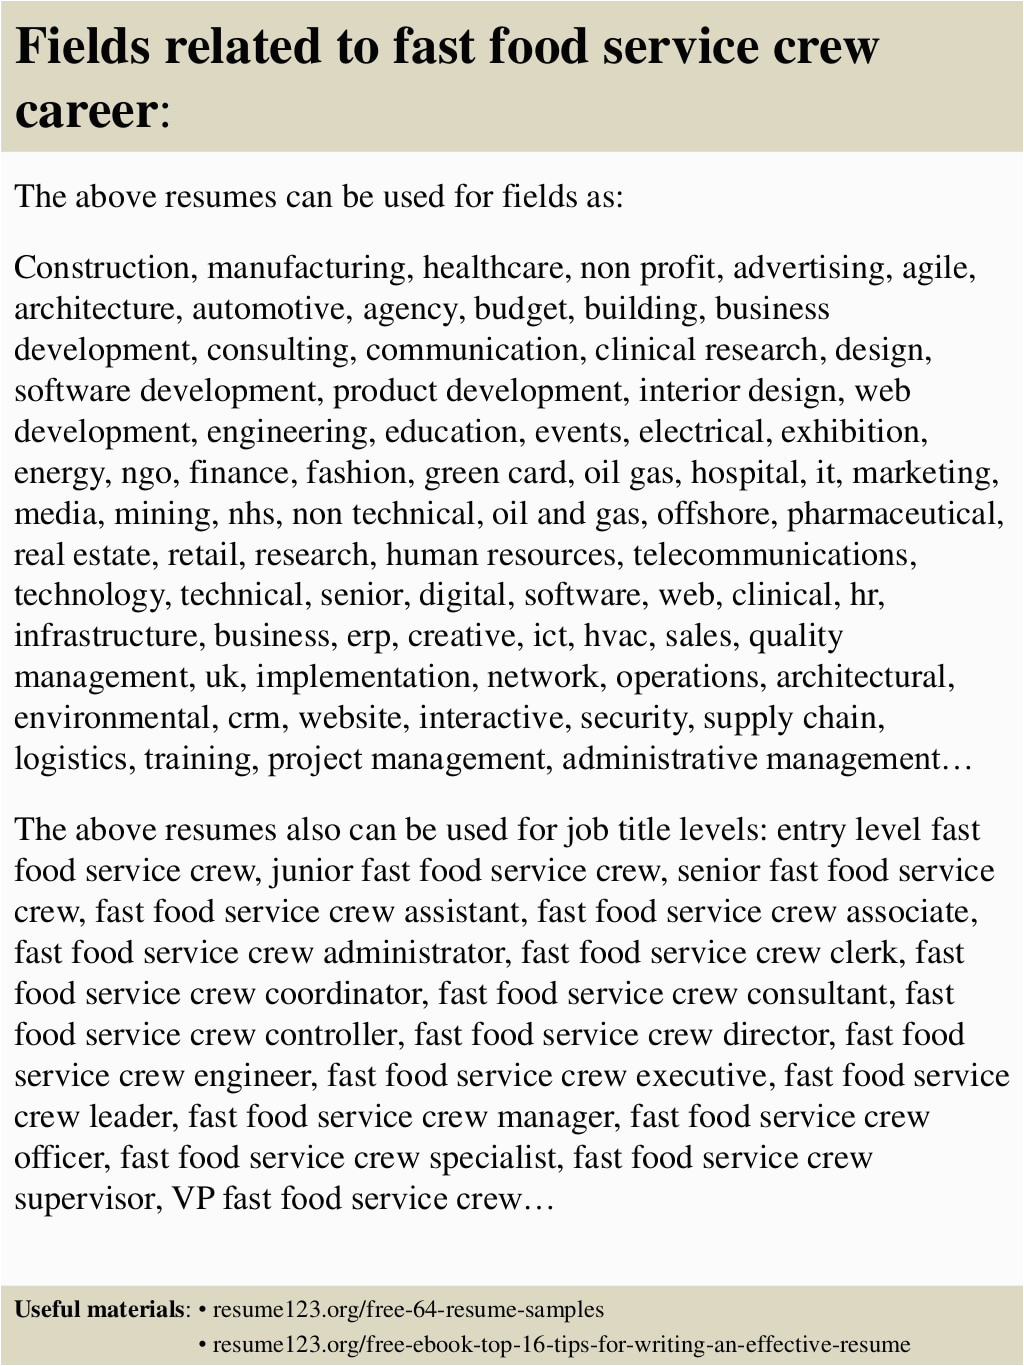 Sample Resume for Fast Food Service Crew top 8 Fast Food Service Crew Resume Samples